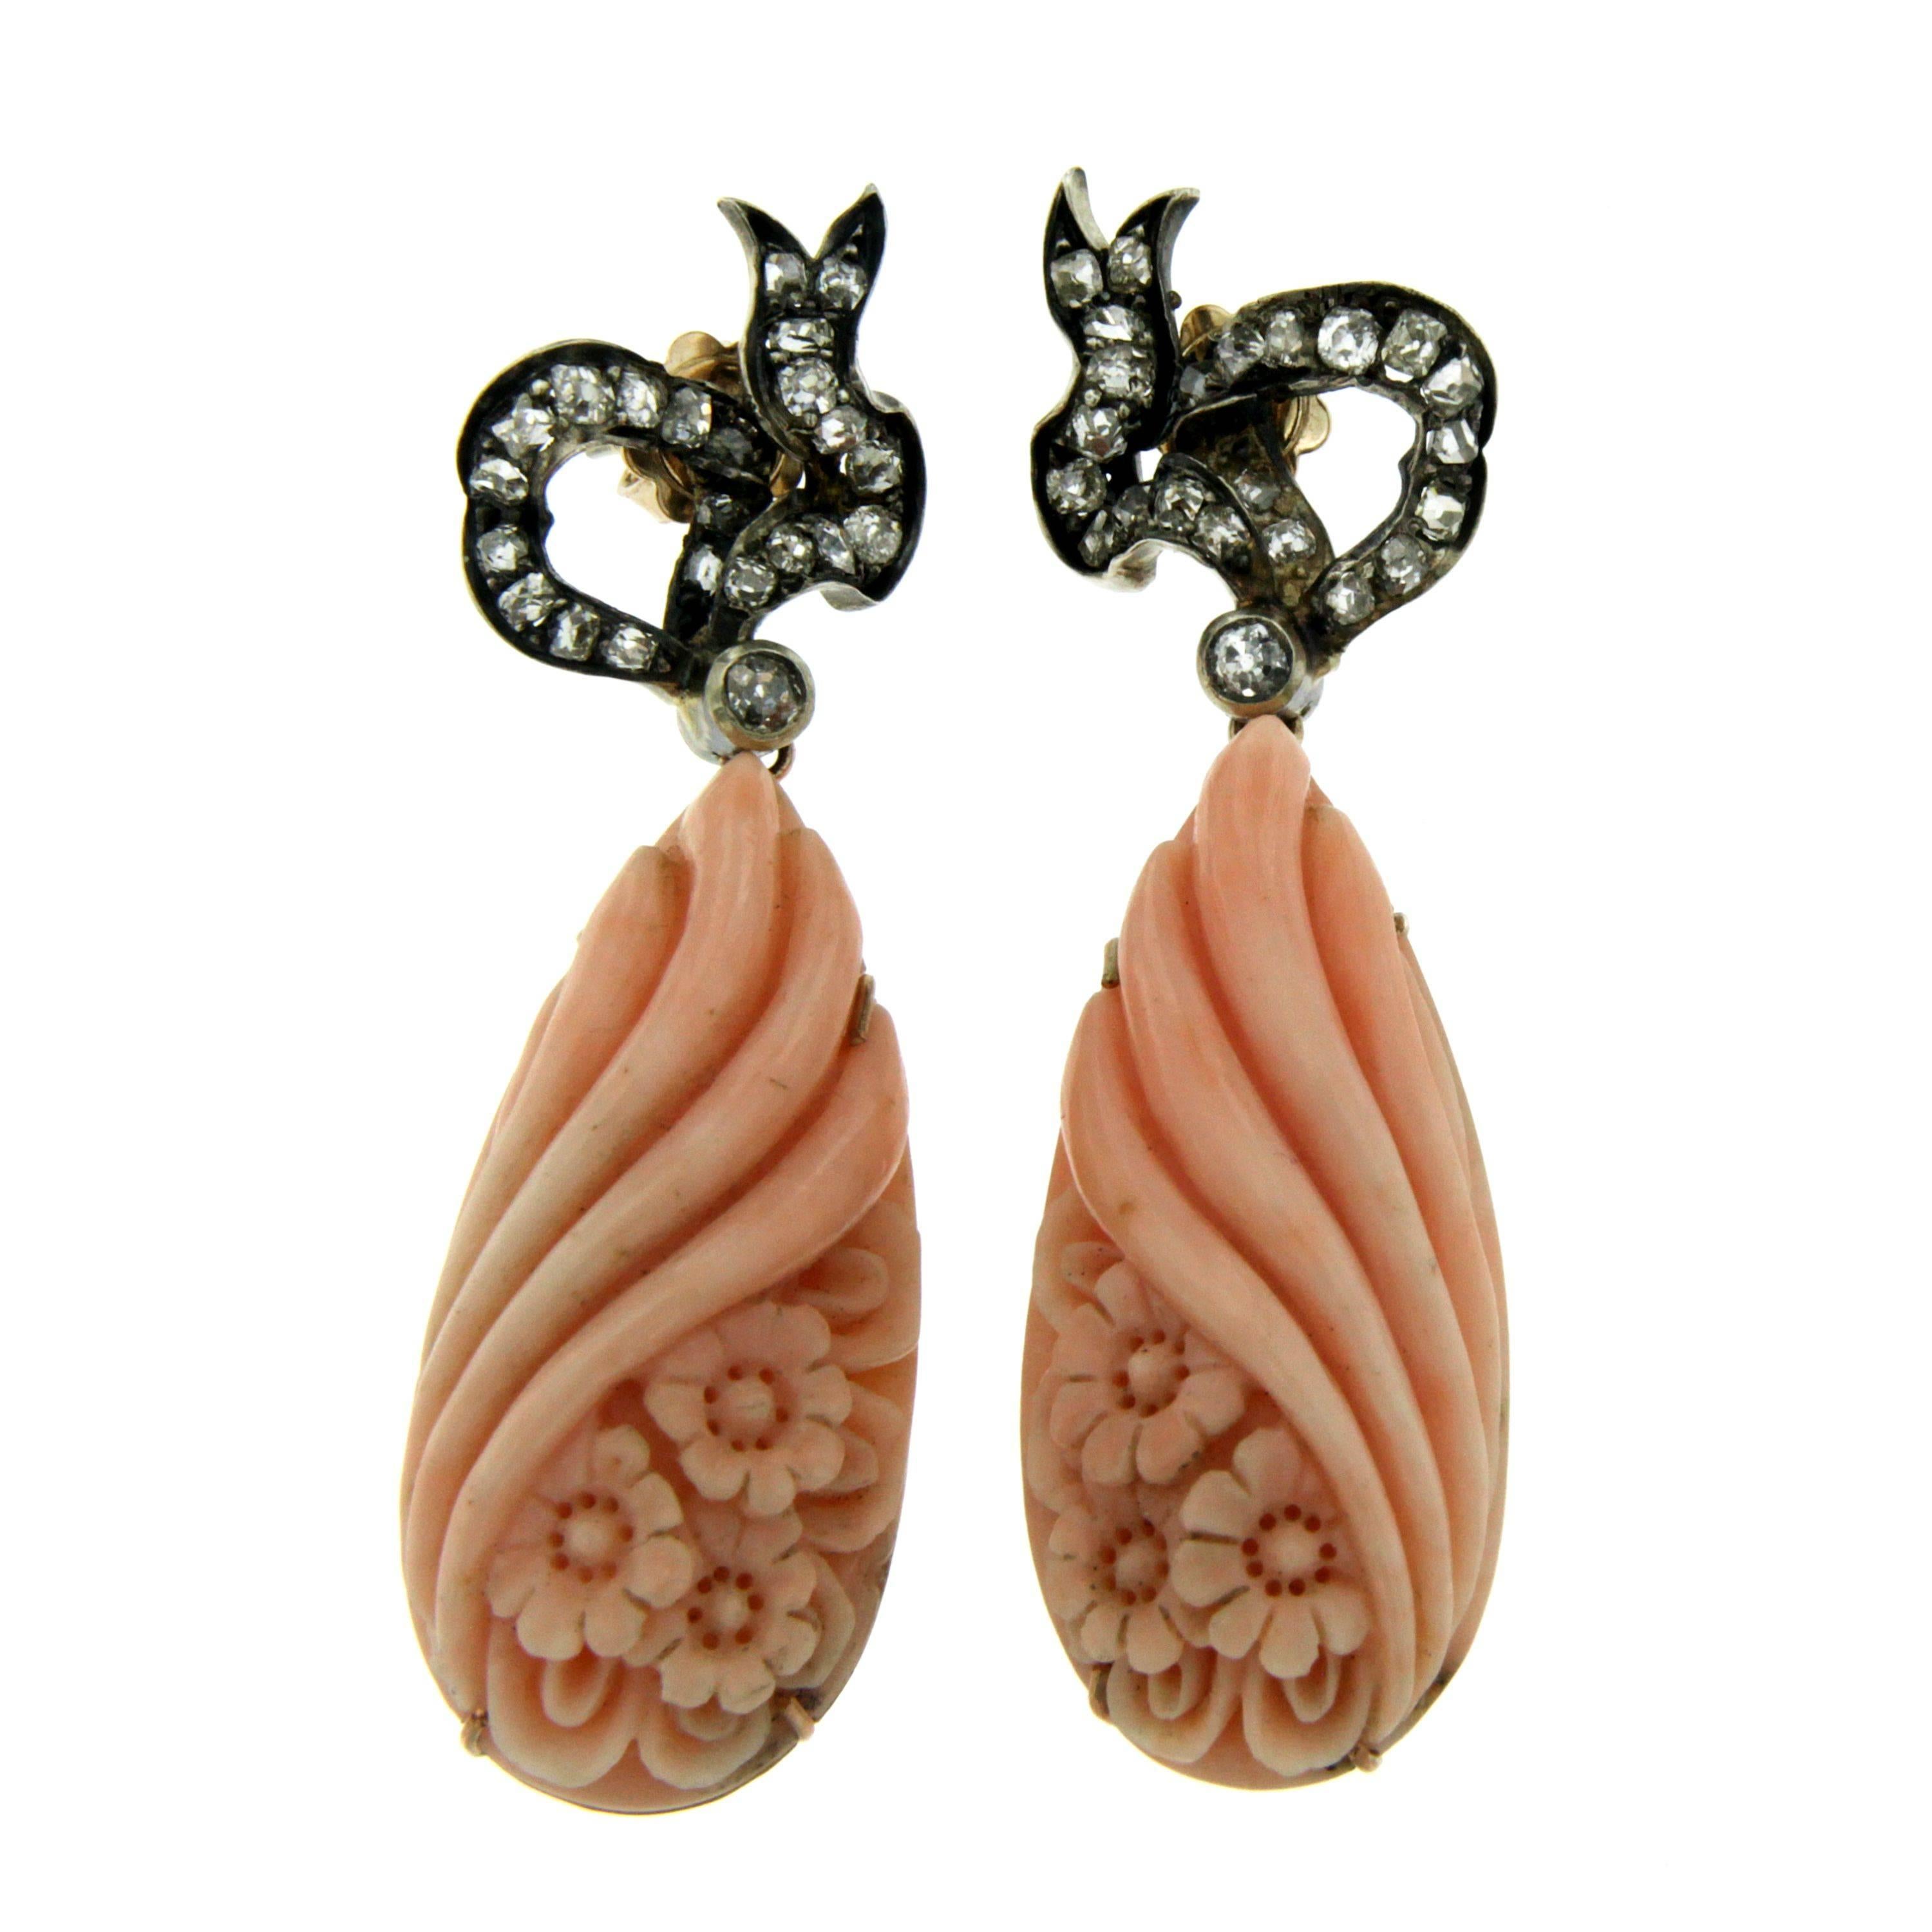 Elegant pink coral and gold earrings. The pear shaped coral feature a beautiful workmanship which resembles a bouquet of roses accented by 1.80 cts of old cut diamonds. Circa 1890

CONDITION: Pre-owned - Excellent 
METAL: 12k Gold and Silver
STONE: